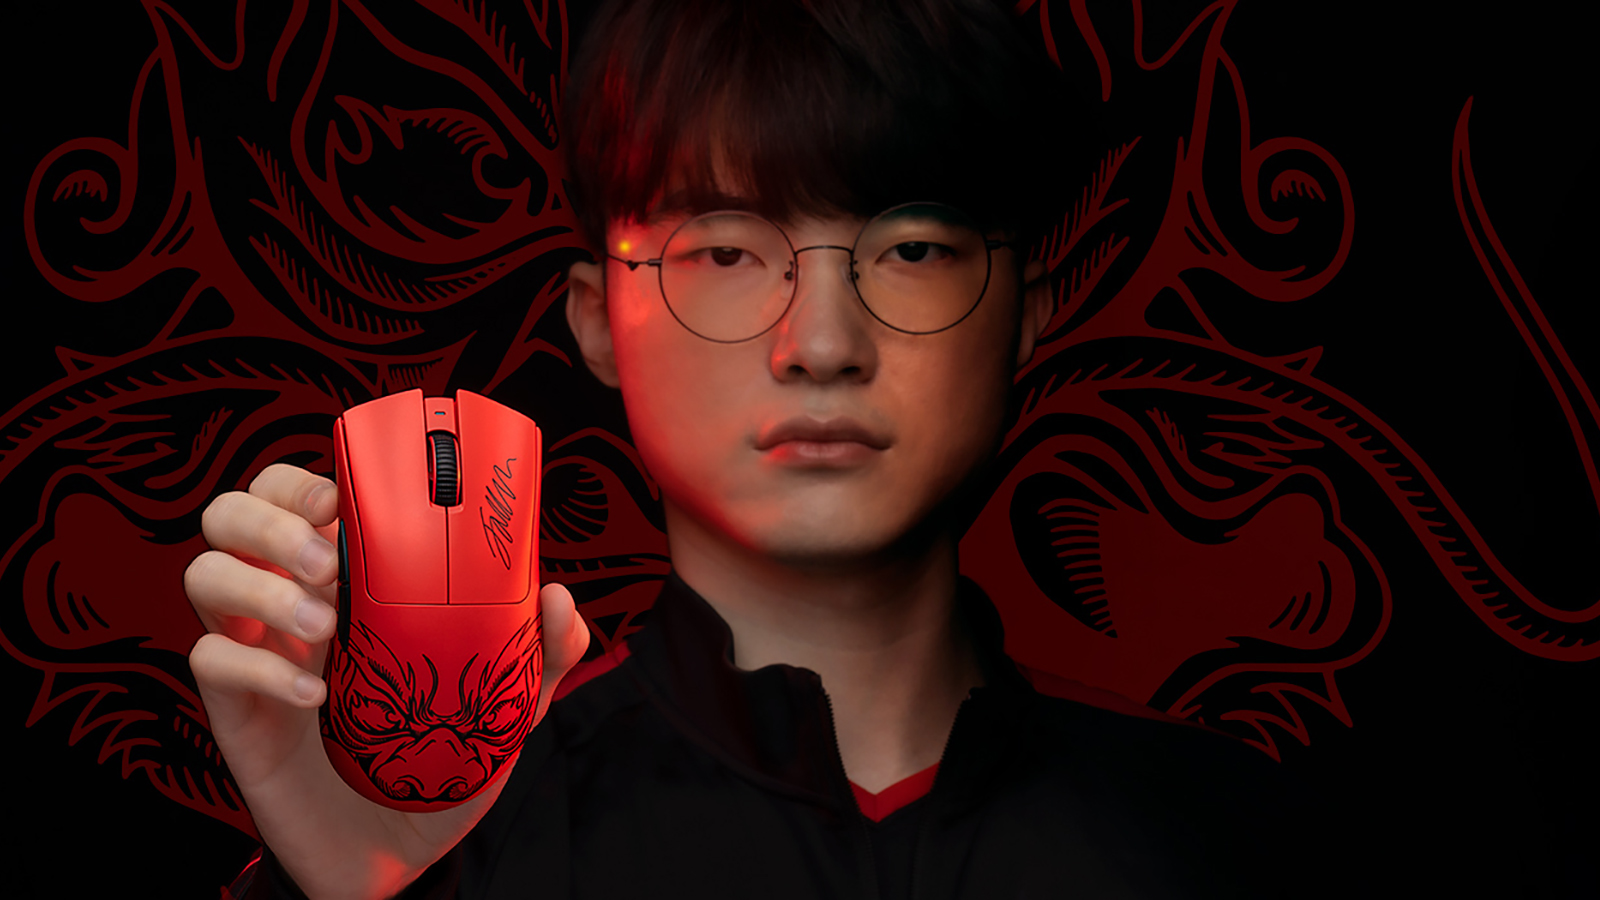 League of Legends T1 Faker holds Razer DeathAdder mouse designed by the GOAT himself